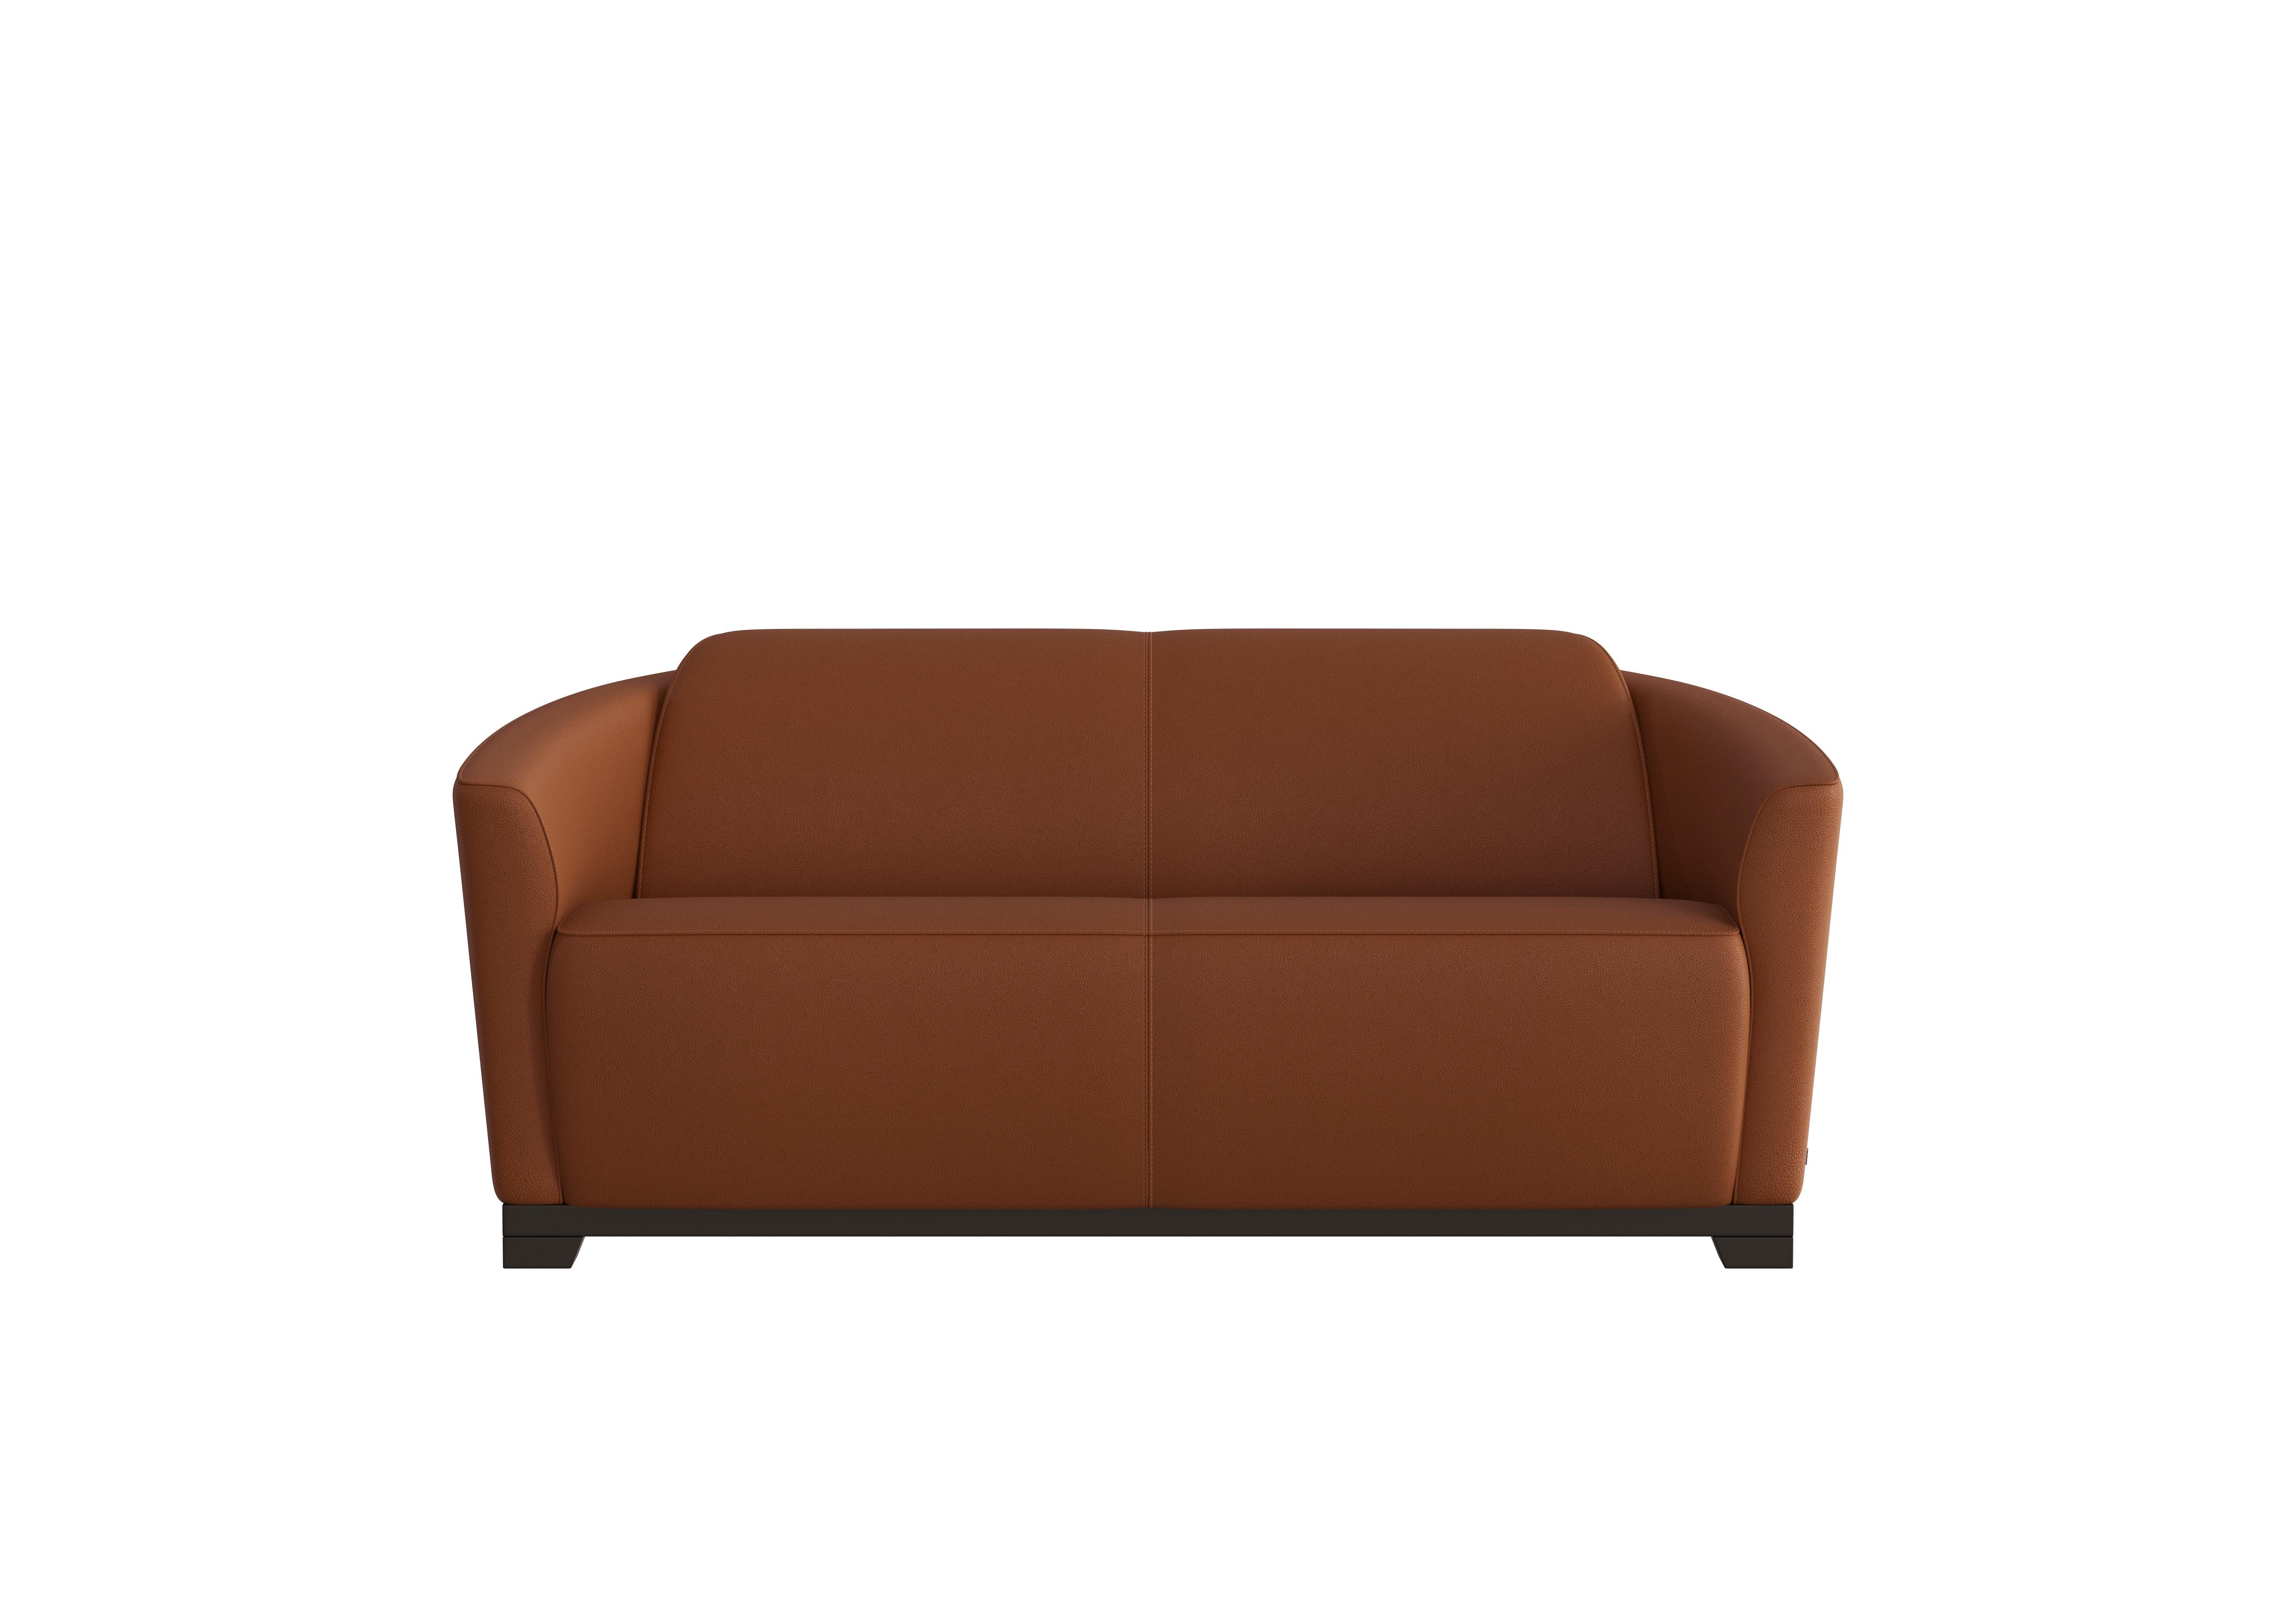 Ketty 2.5 Seater Leather Sofa in Botero Cuoio 2151 on Furniture Village